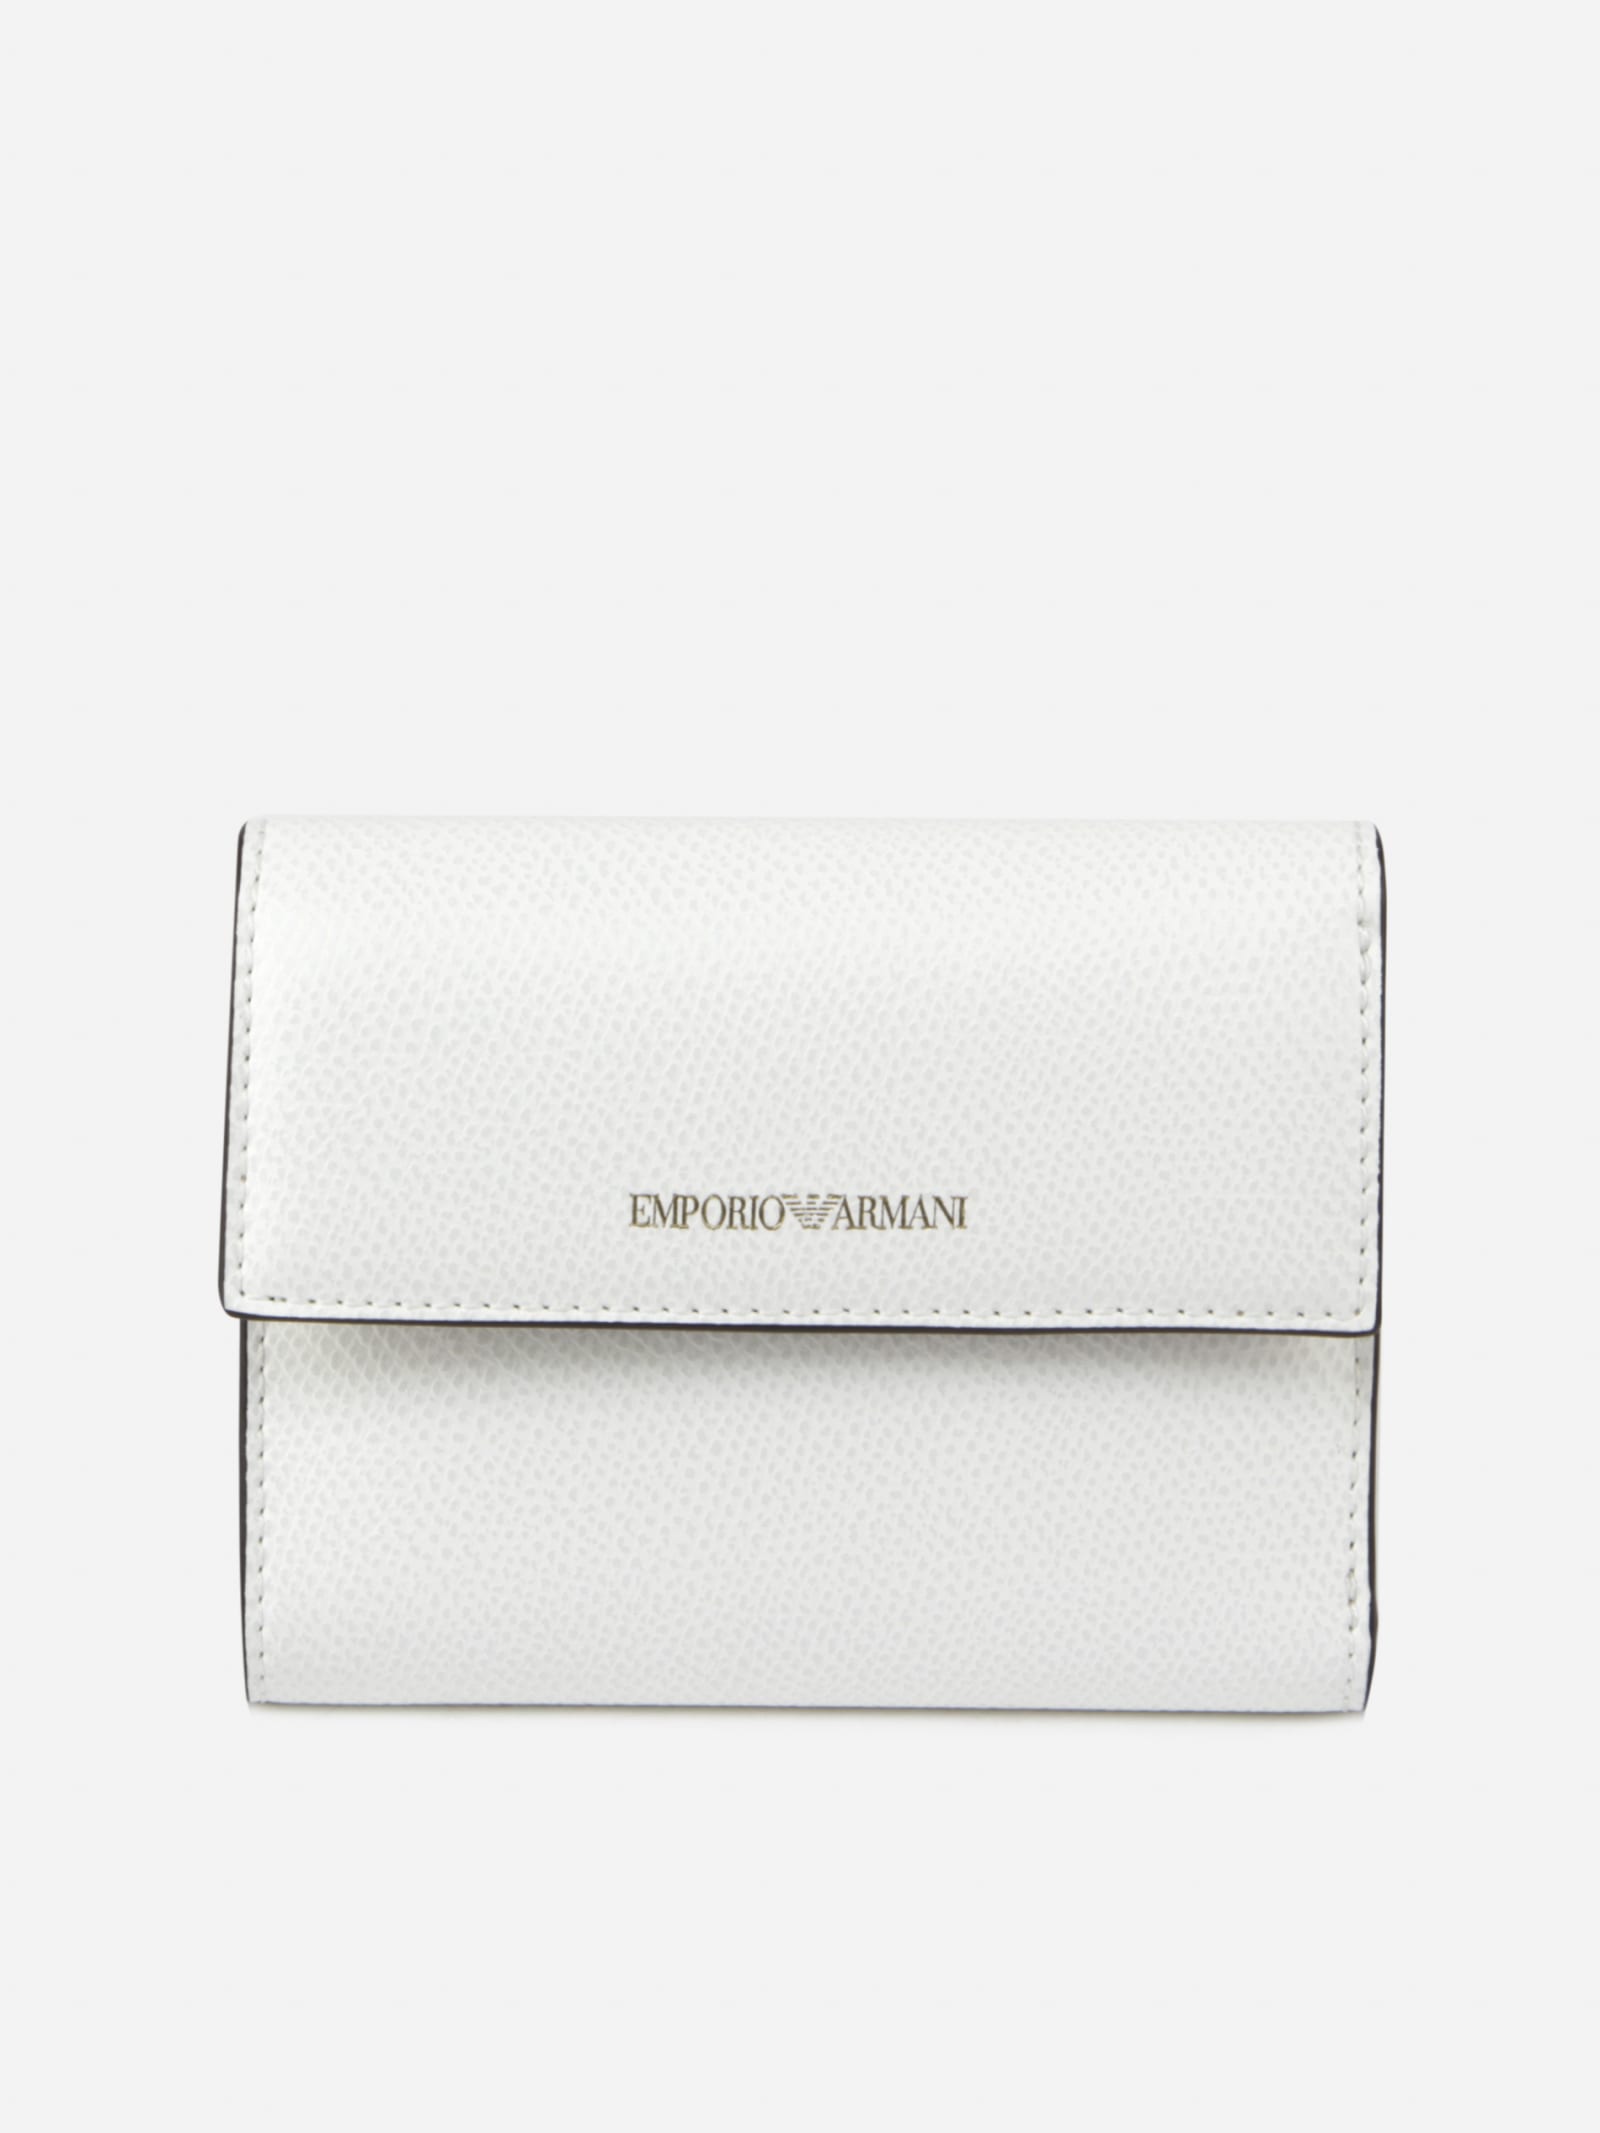 Emporio Armani Trifold Wallet With Garnet Effect